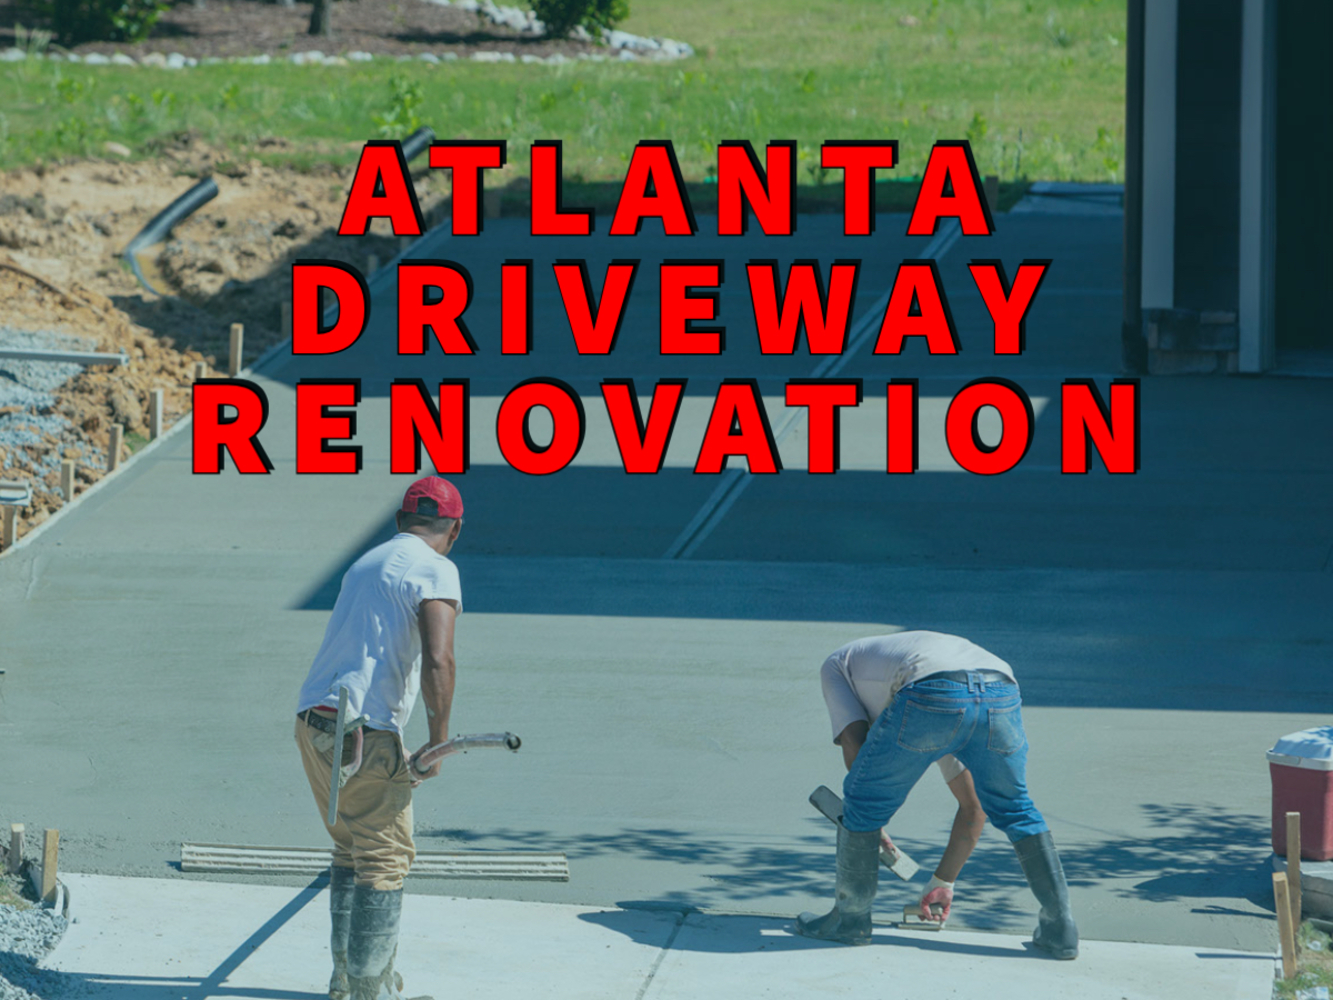 Atlanta Driveway Renovation written in red over workers laying concrete driveway